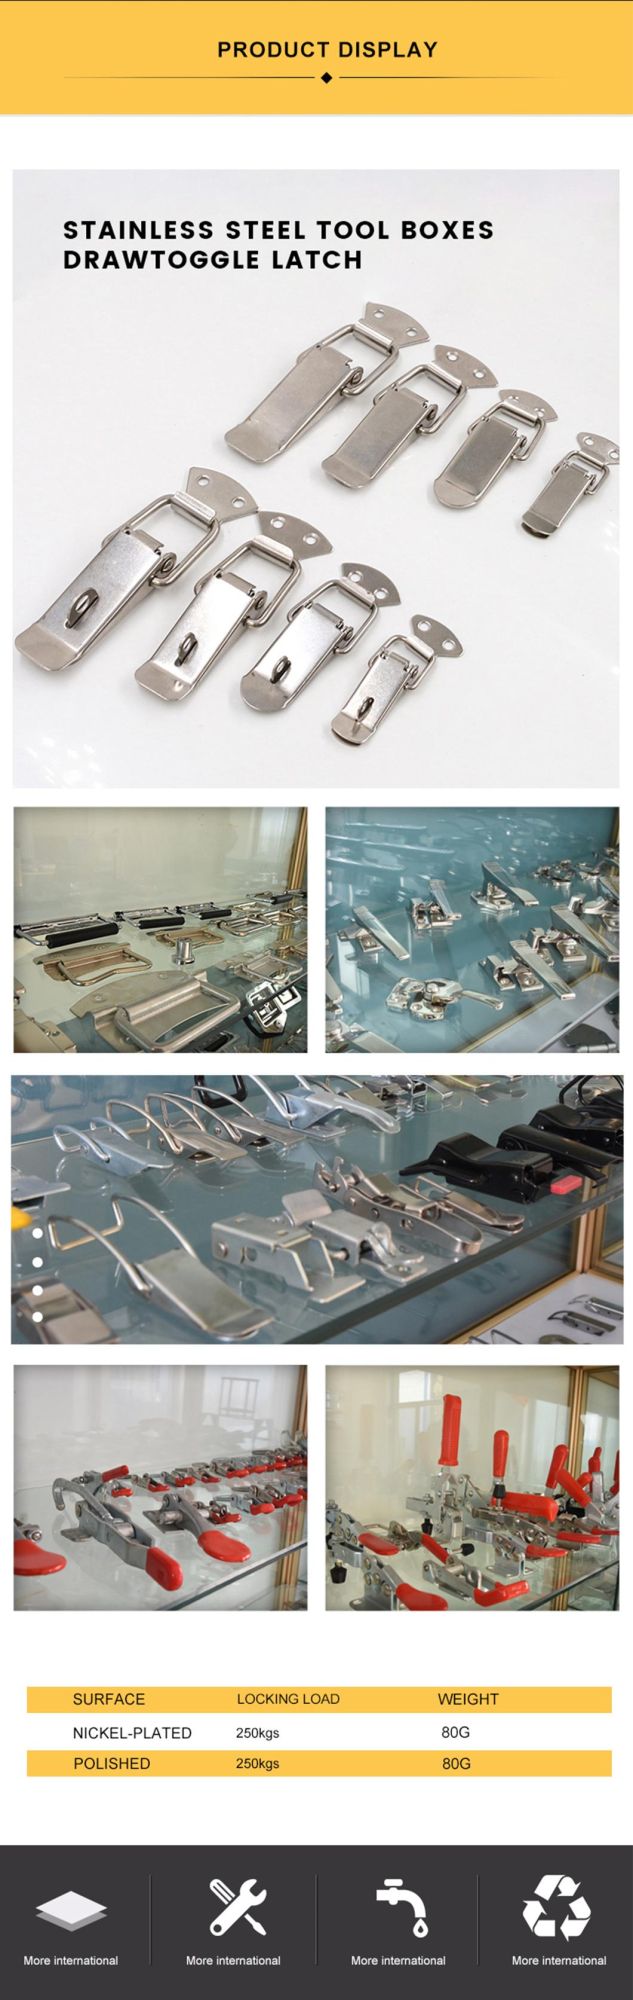 Mild Steel or Stainless Steel Rotary Draw Latch Iron Nickel Alloy Toggle Latch 75mm Trailer Latch